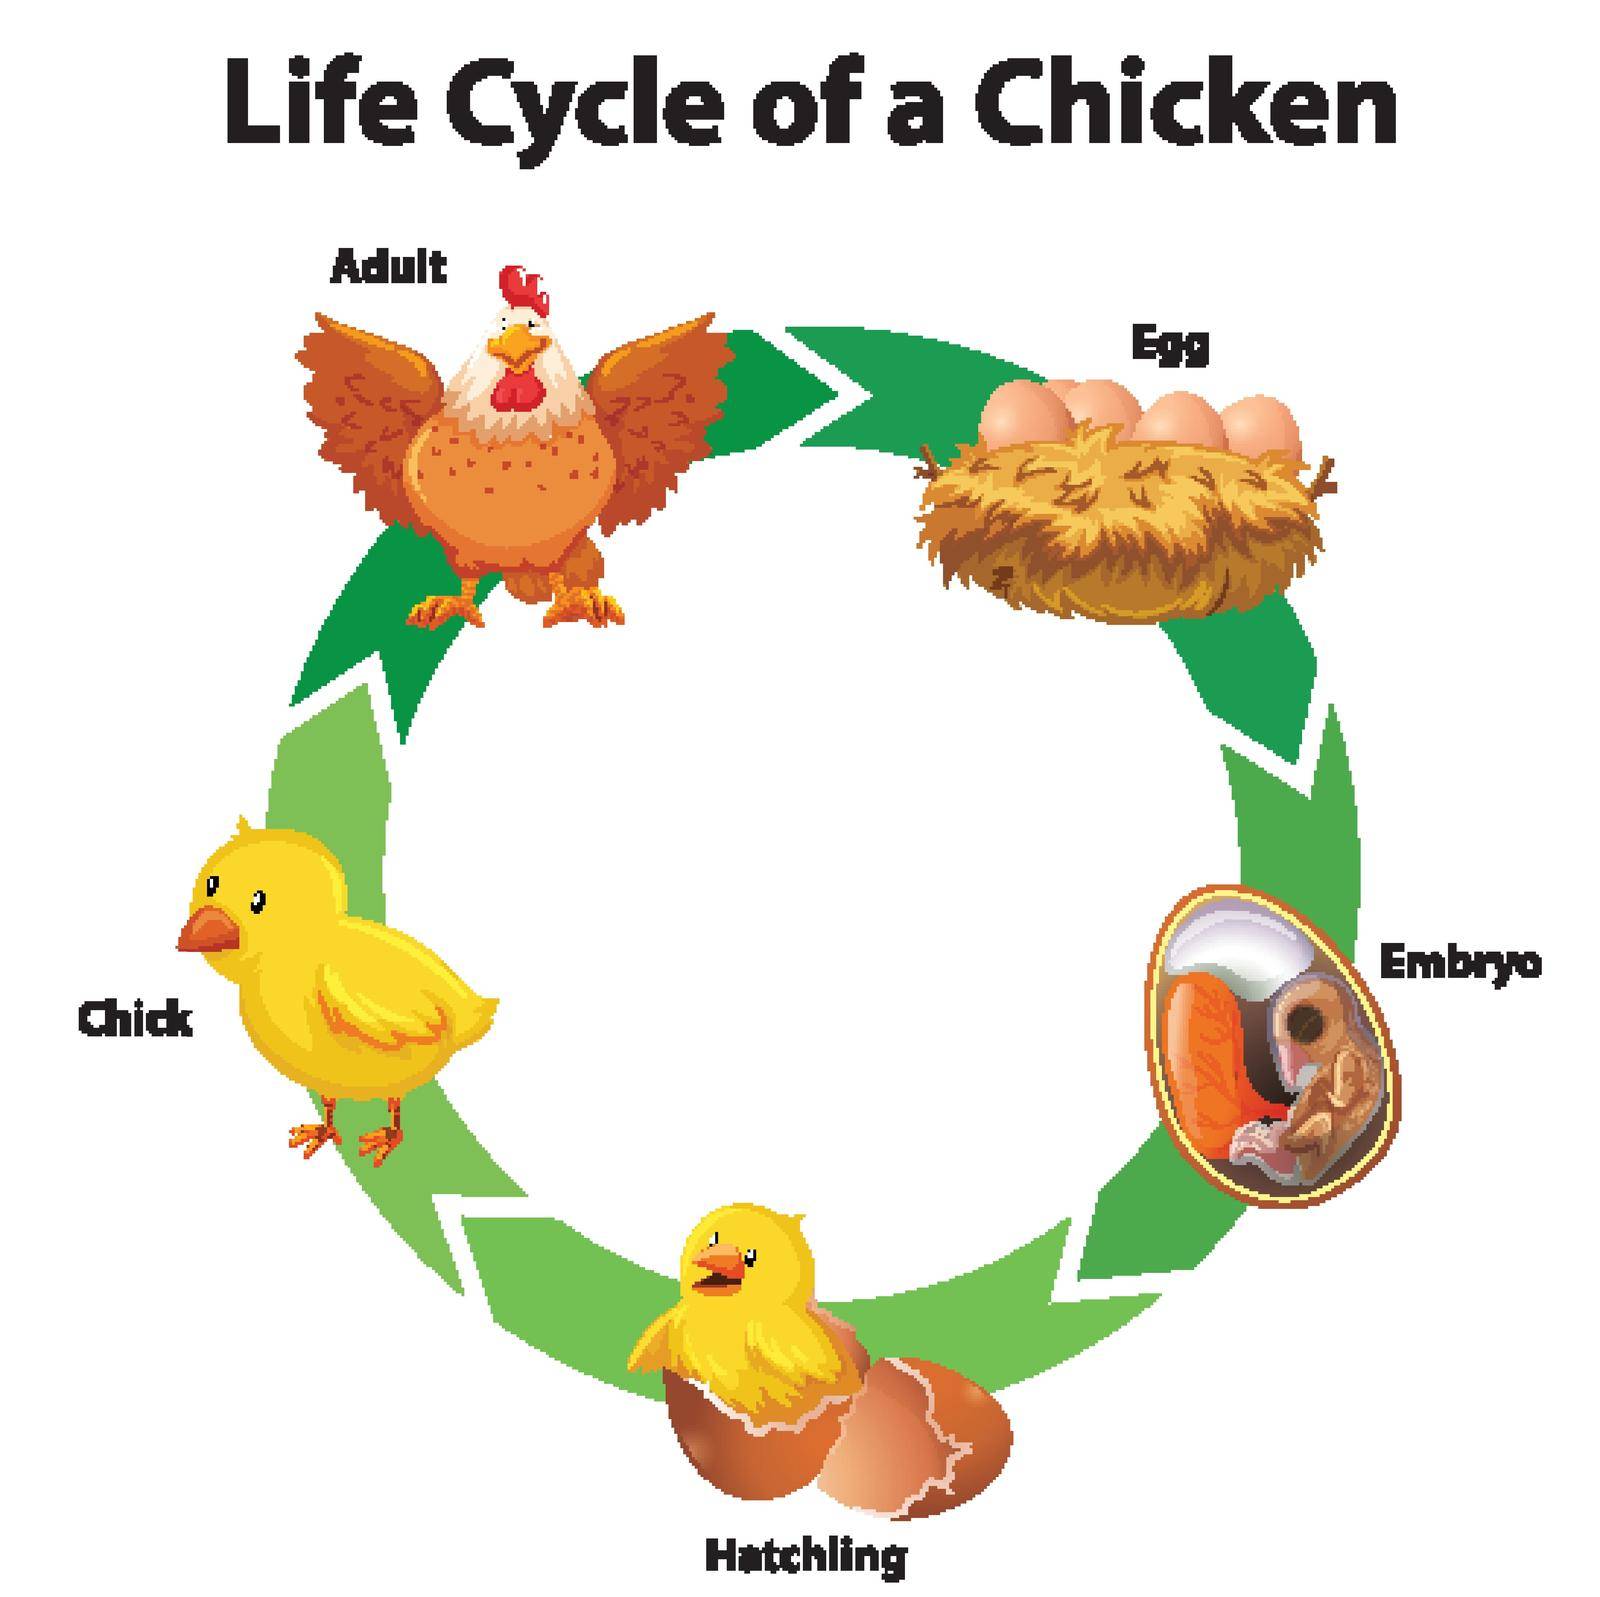 Diagram showing life cycle of chicken illustration